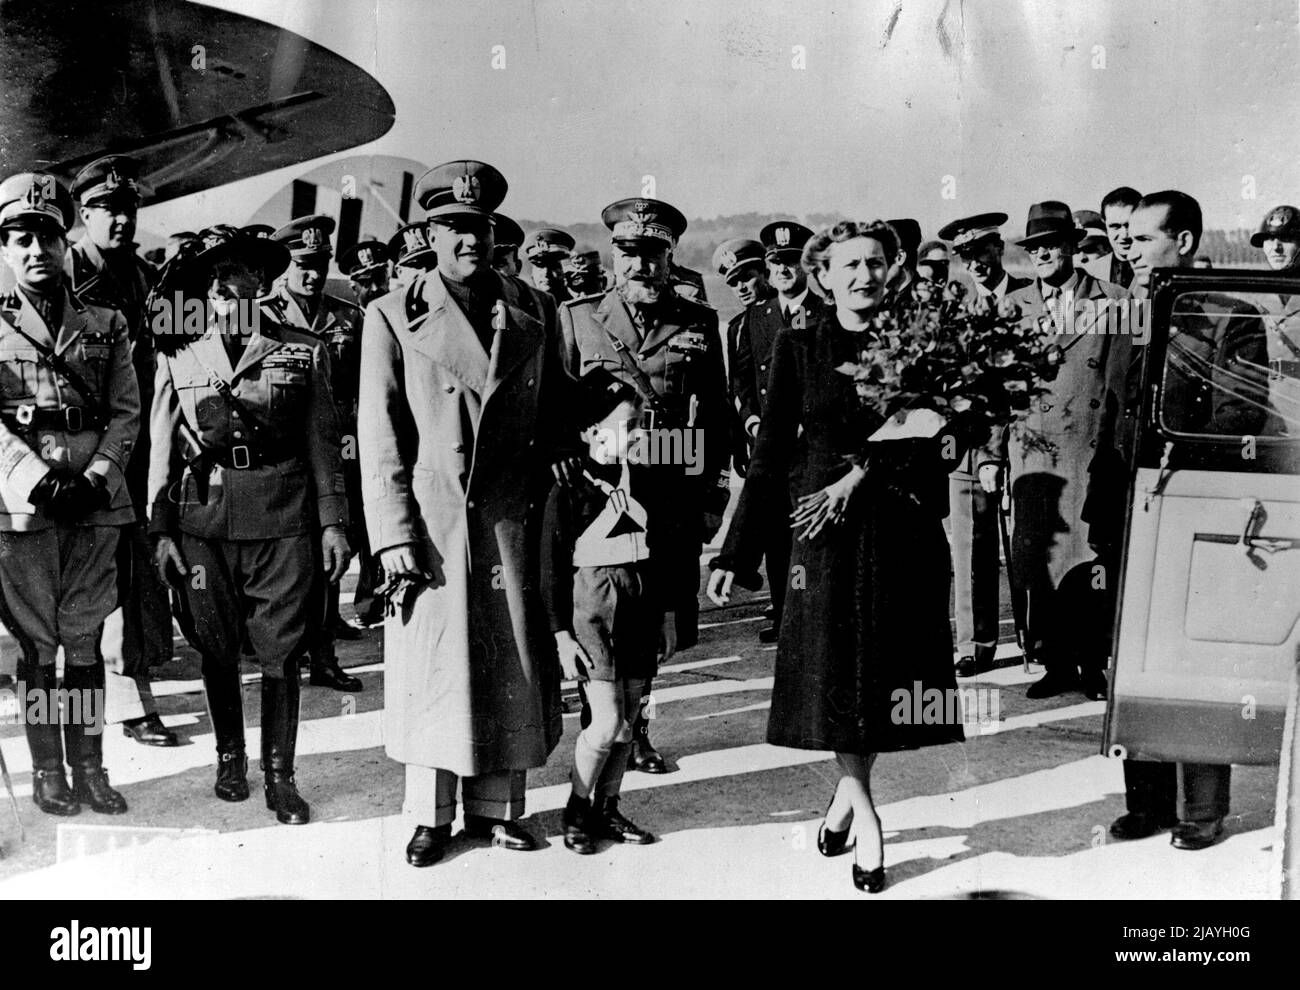 Count Ciano Returns From Vienna: Count Ciano, Italian Foreign ministers, photographed with his wife and son on arrival at the ***** airport Rome. On his return from Vienna, where he helped to draw up the frontier agreement between Czechoslovakia and Hungary. November 7, 1938. (Photo by Keystone). Stock Photo